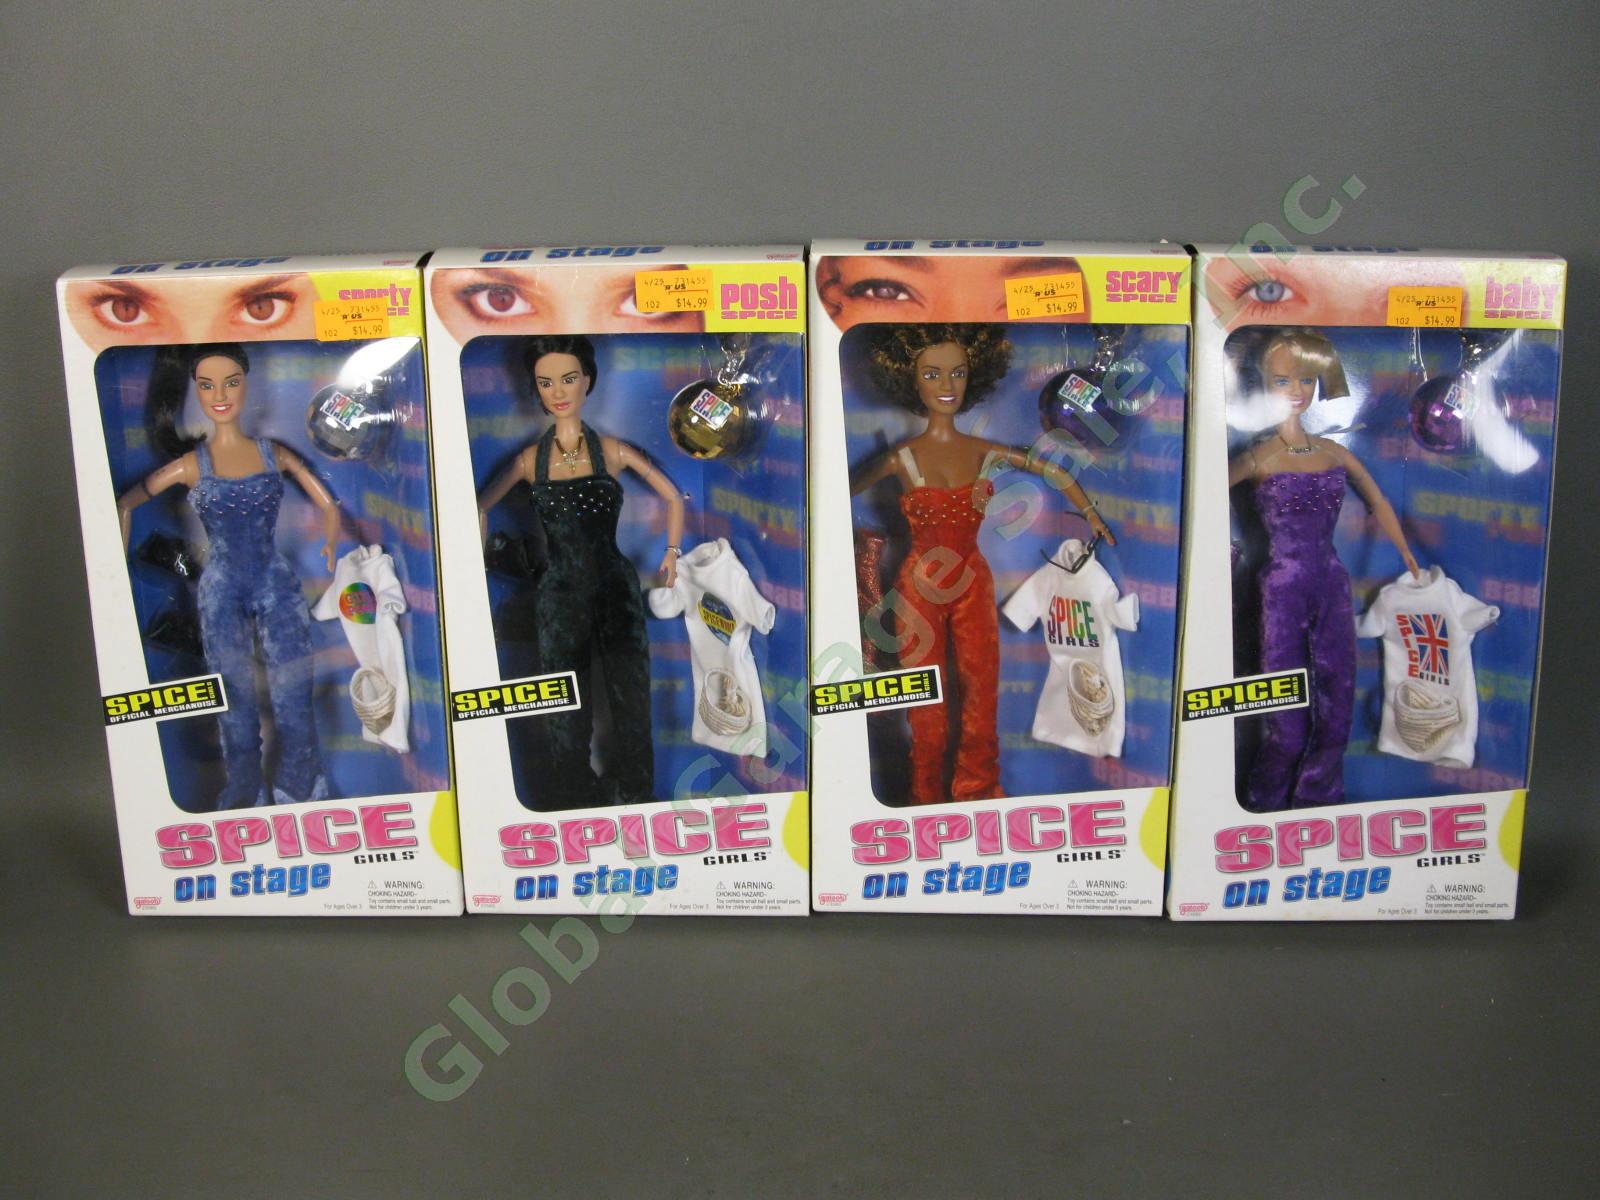 VTG 1998 4 Spice Girls On Stage COMPLETE Galoob Doll Set Scary Posh Sporty Baby